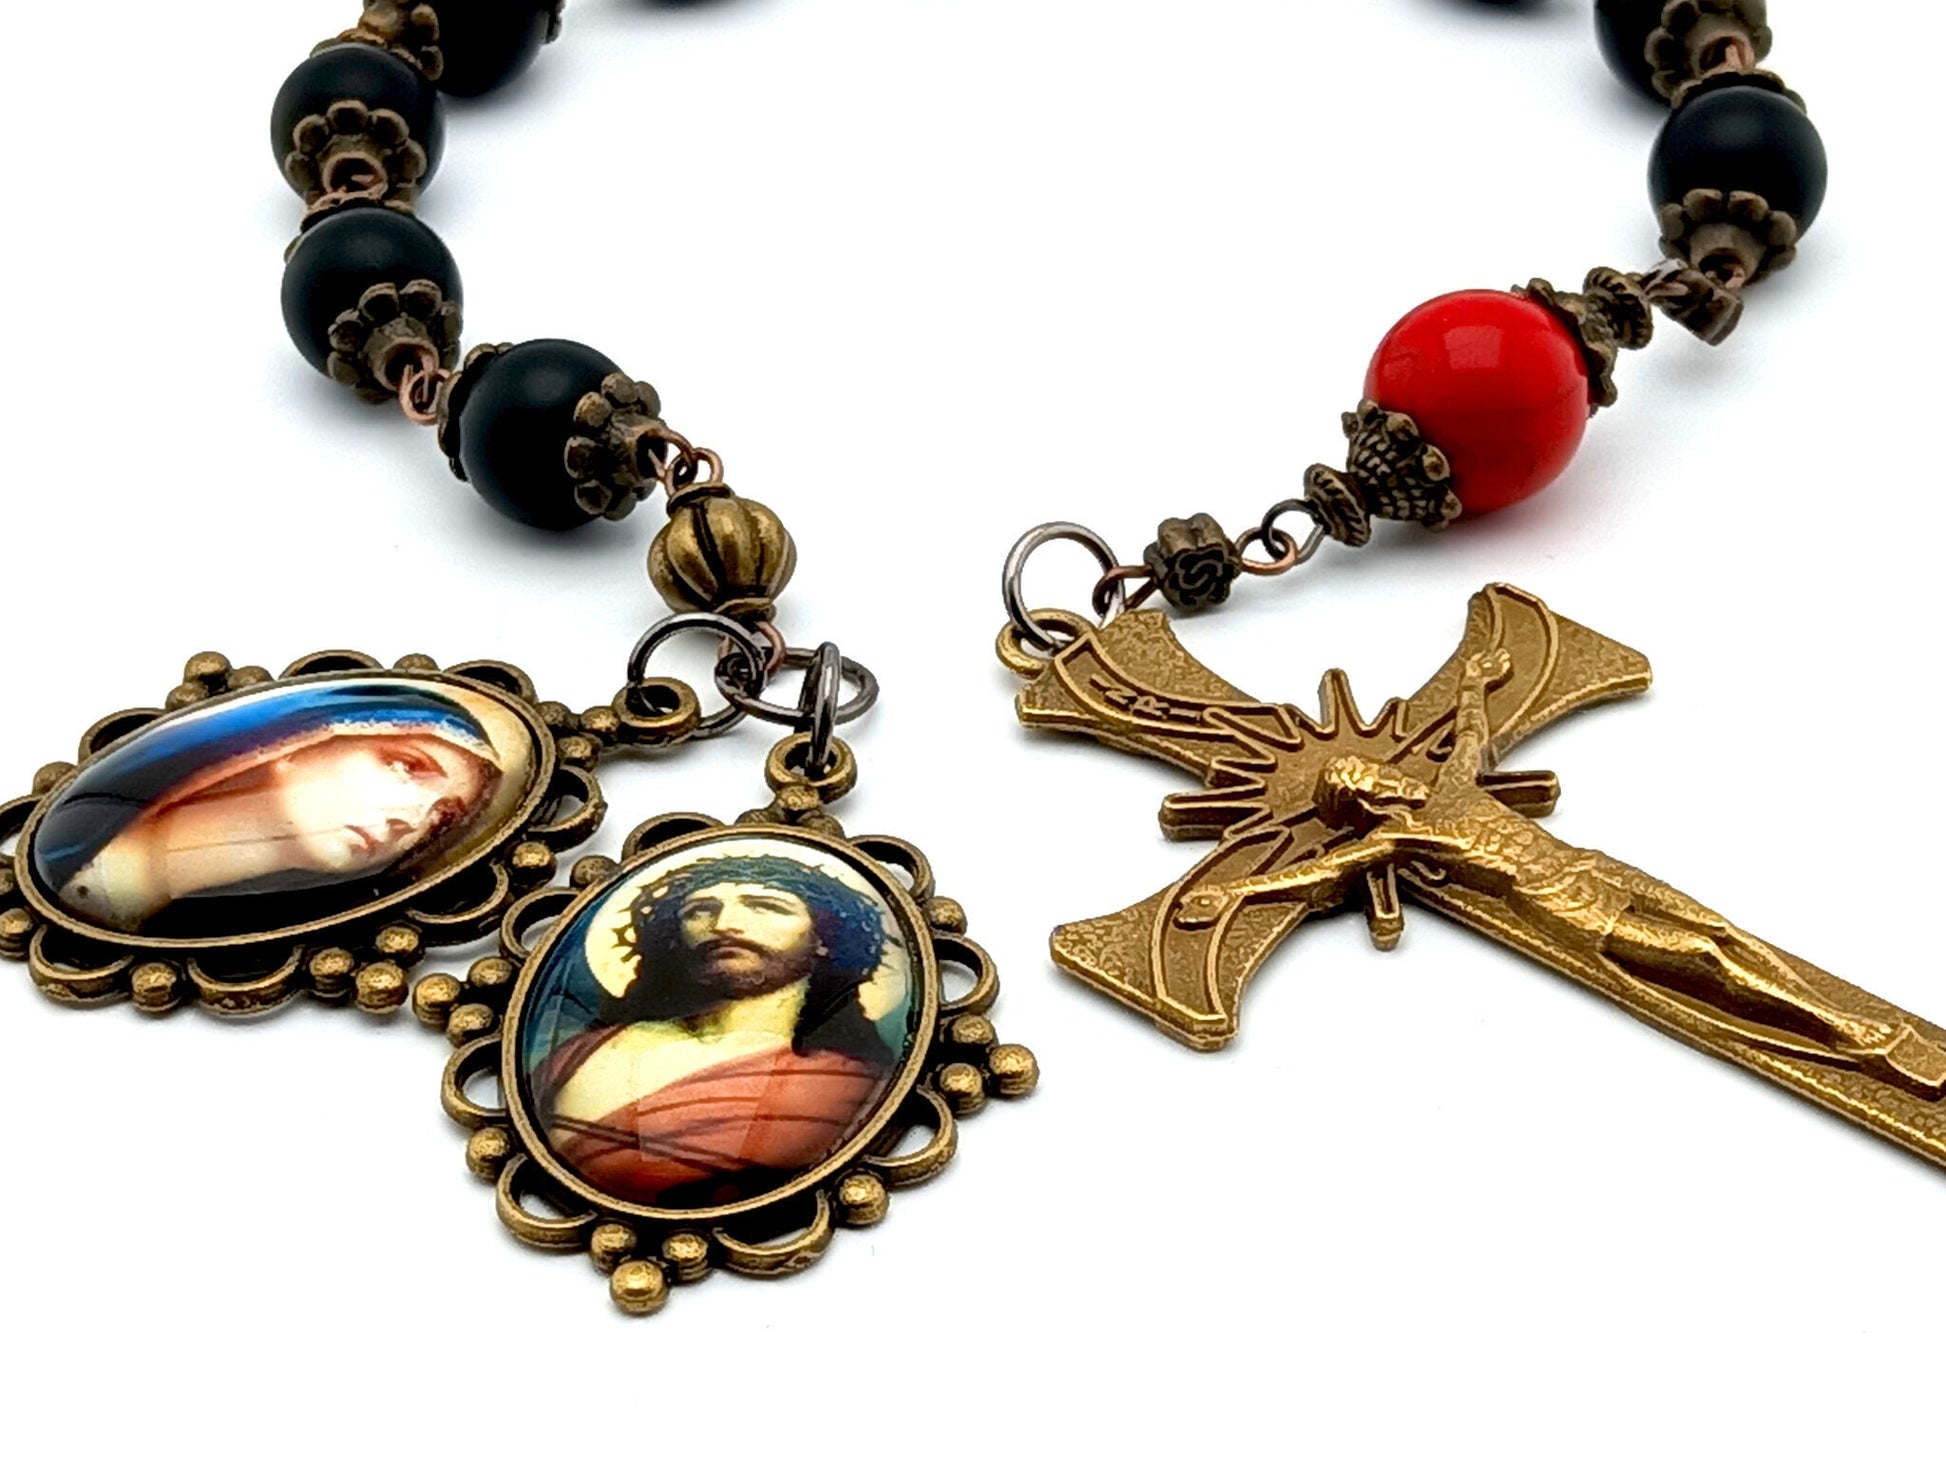 Crown of Thorns unique rosary beads single decade rosary with onyx and red gemstone beads, bronze crucifix and Christs passion and Sorrowful Mother picture medals.